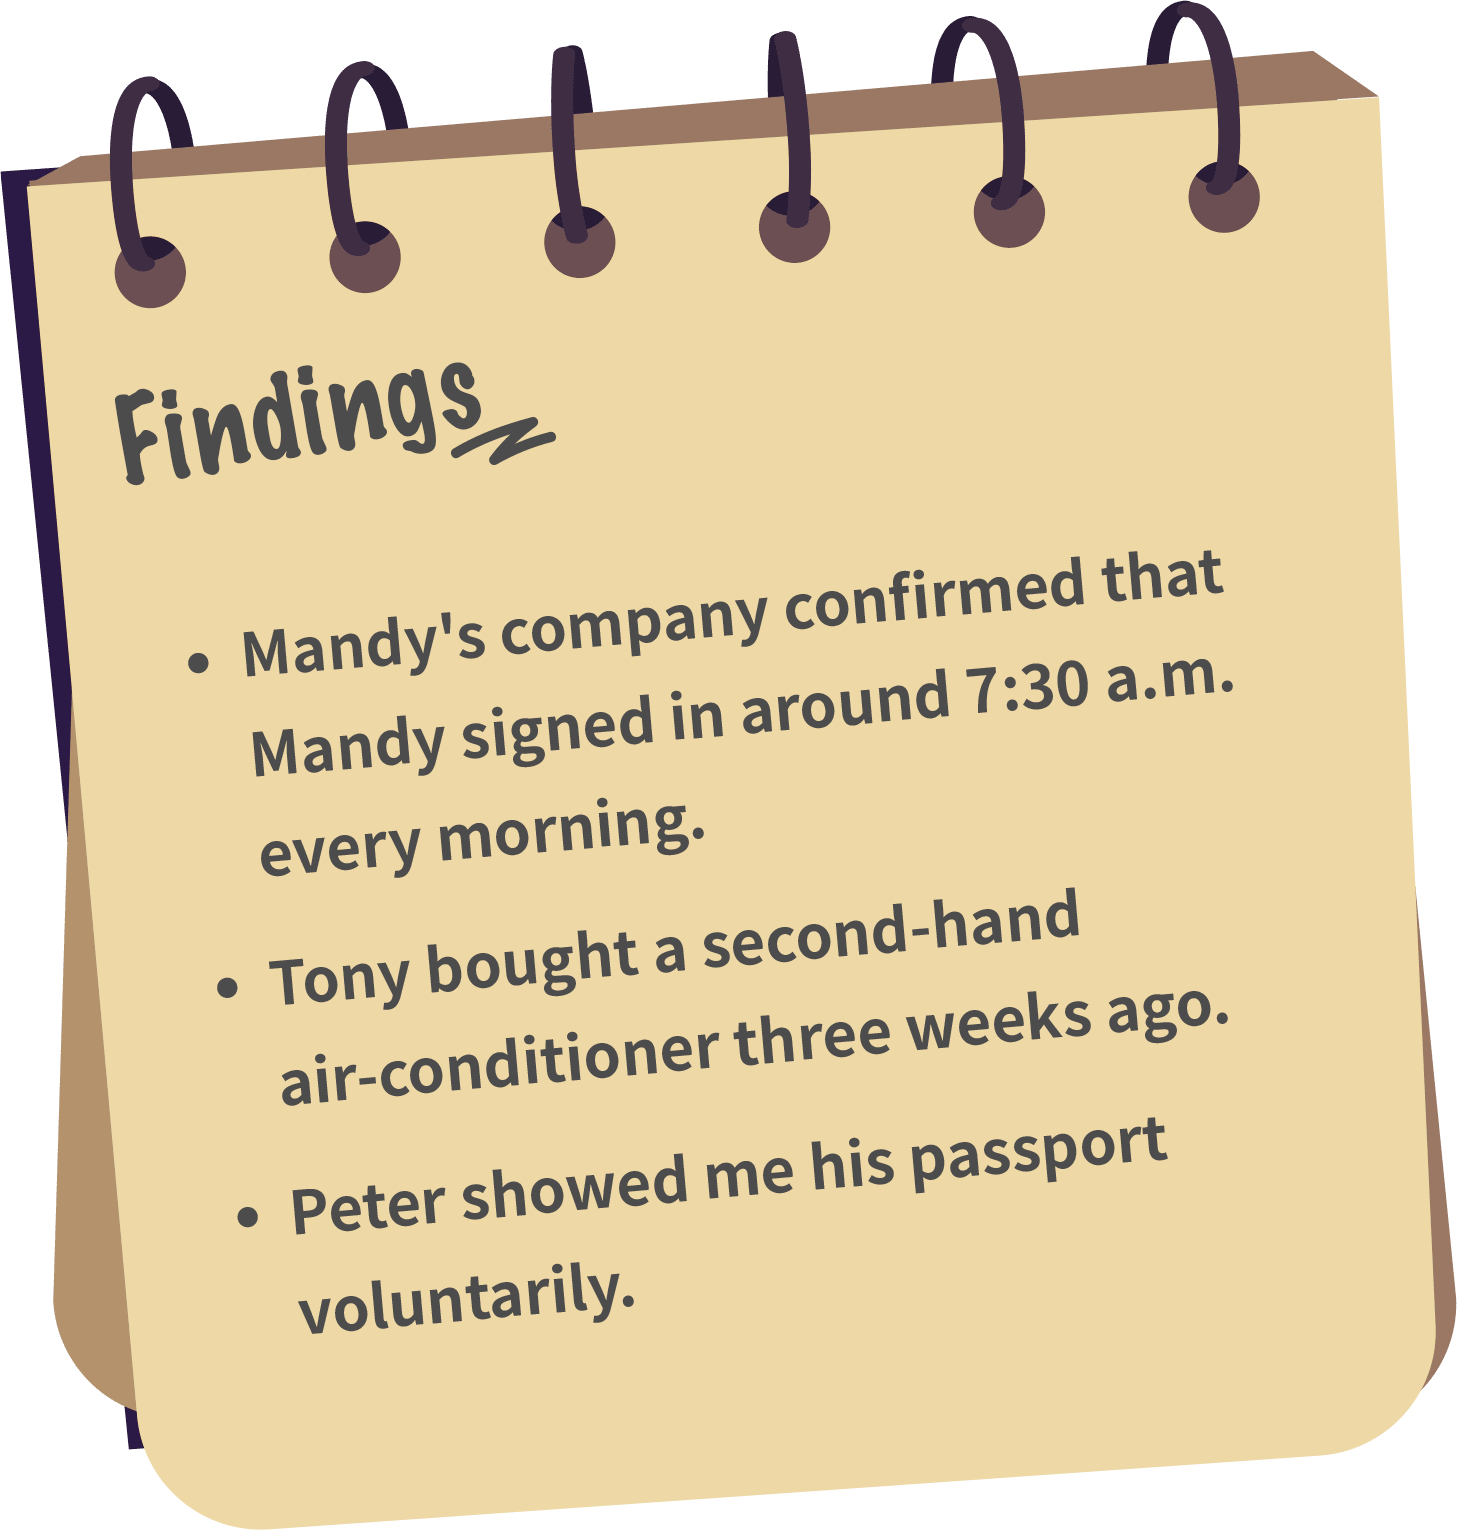 Finds:
  1) Mandy's company confirmed that Mandy signed in around 7:30 a.m. every morning.
  2) Tony bought a second-hand air-conditioner three weeks ago.
  3) Peter showed me his passport voluntarily.